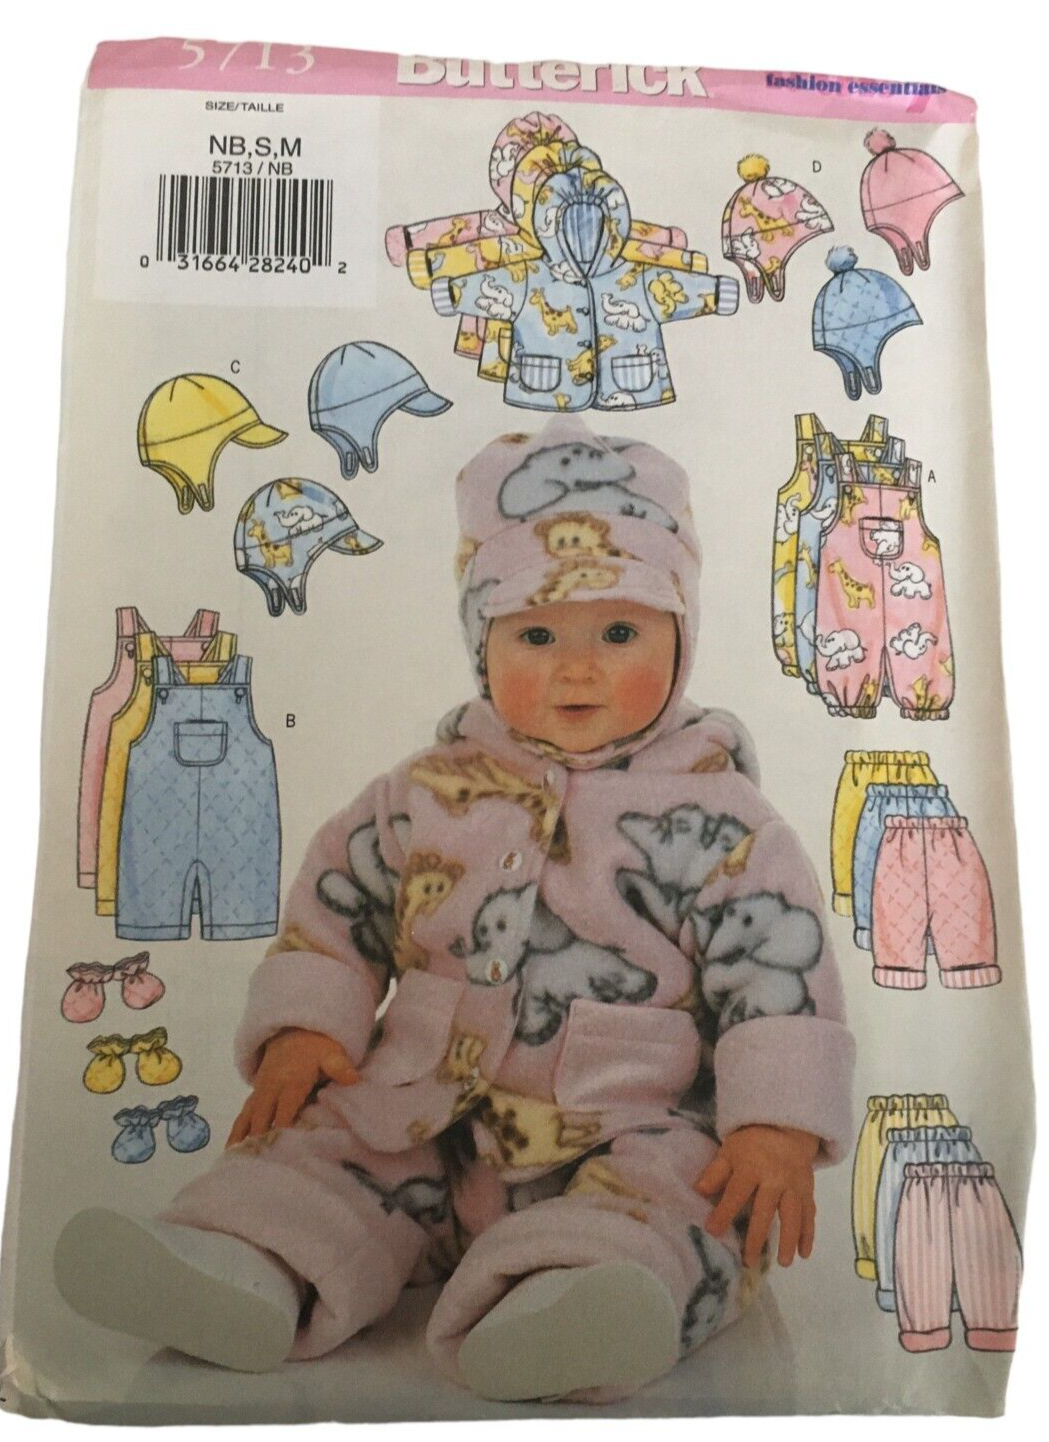 Butterick Sewing Pattern 5713 Baby Jacket Overalls Pants Hat Winter NB S M Uncut - $4.99